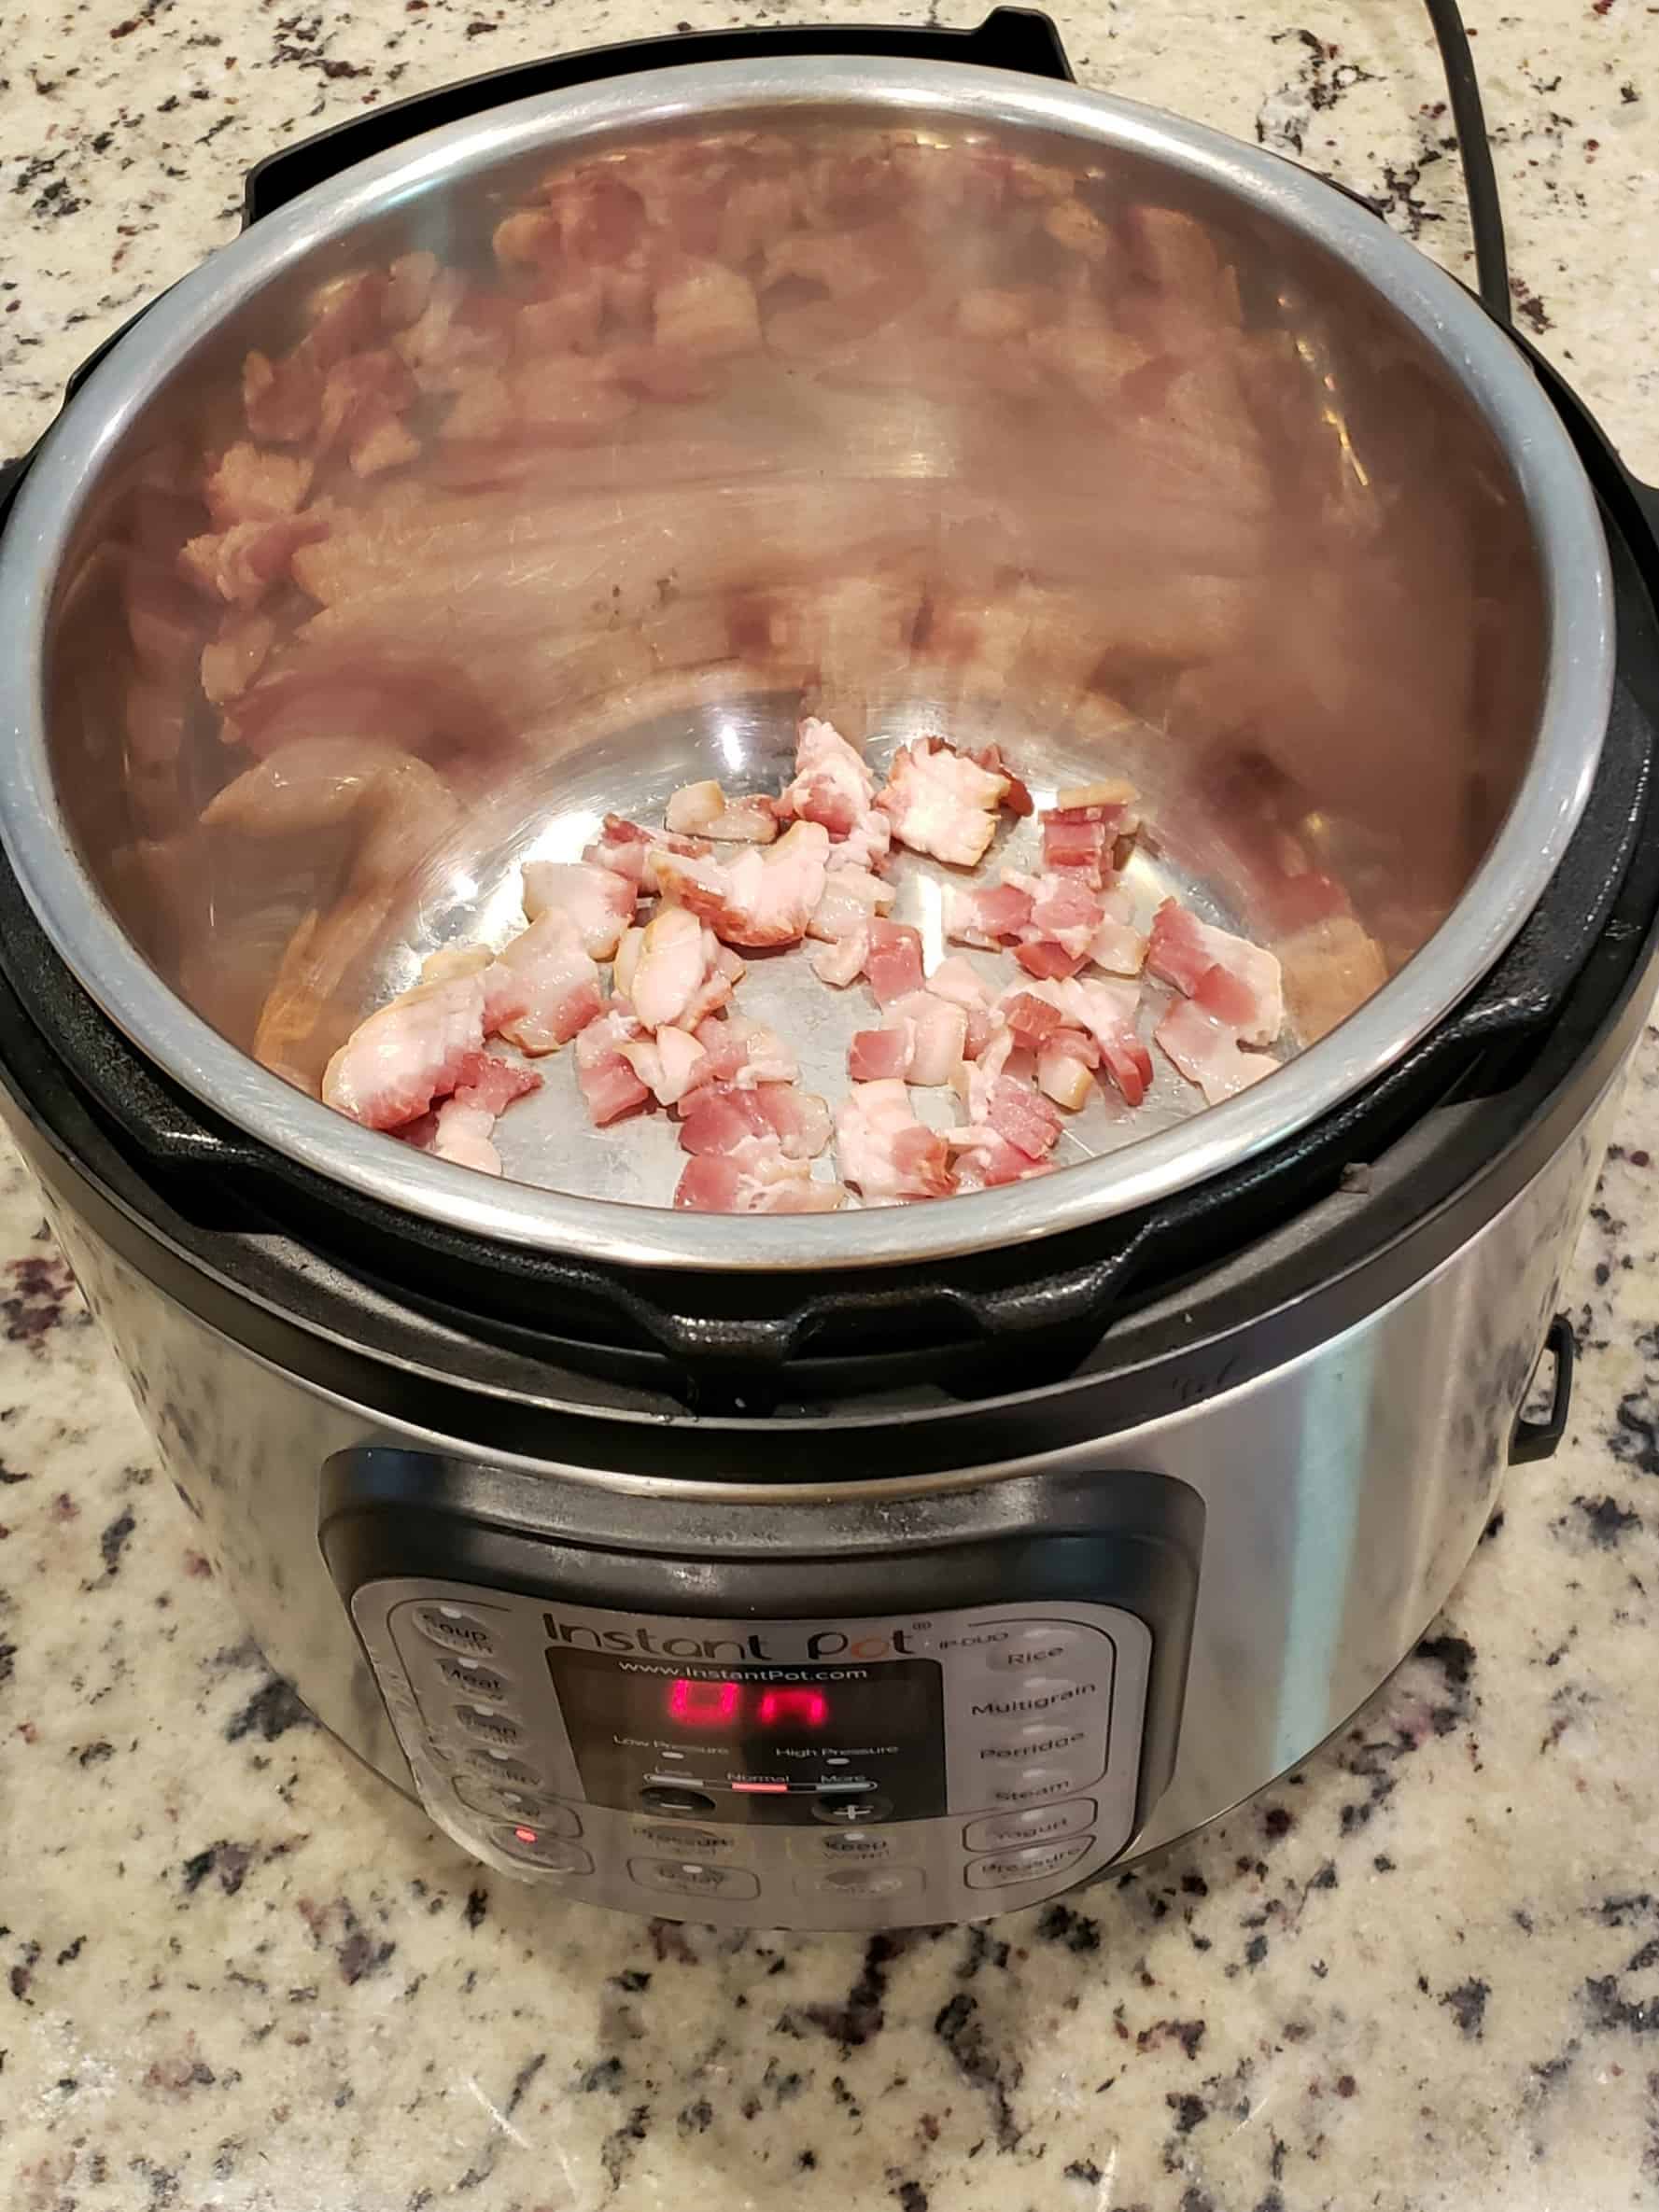 Cooking pieces of bacon in the Instant Pot on Saute